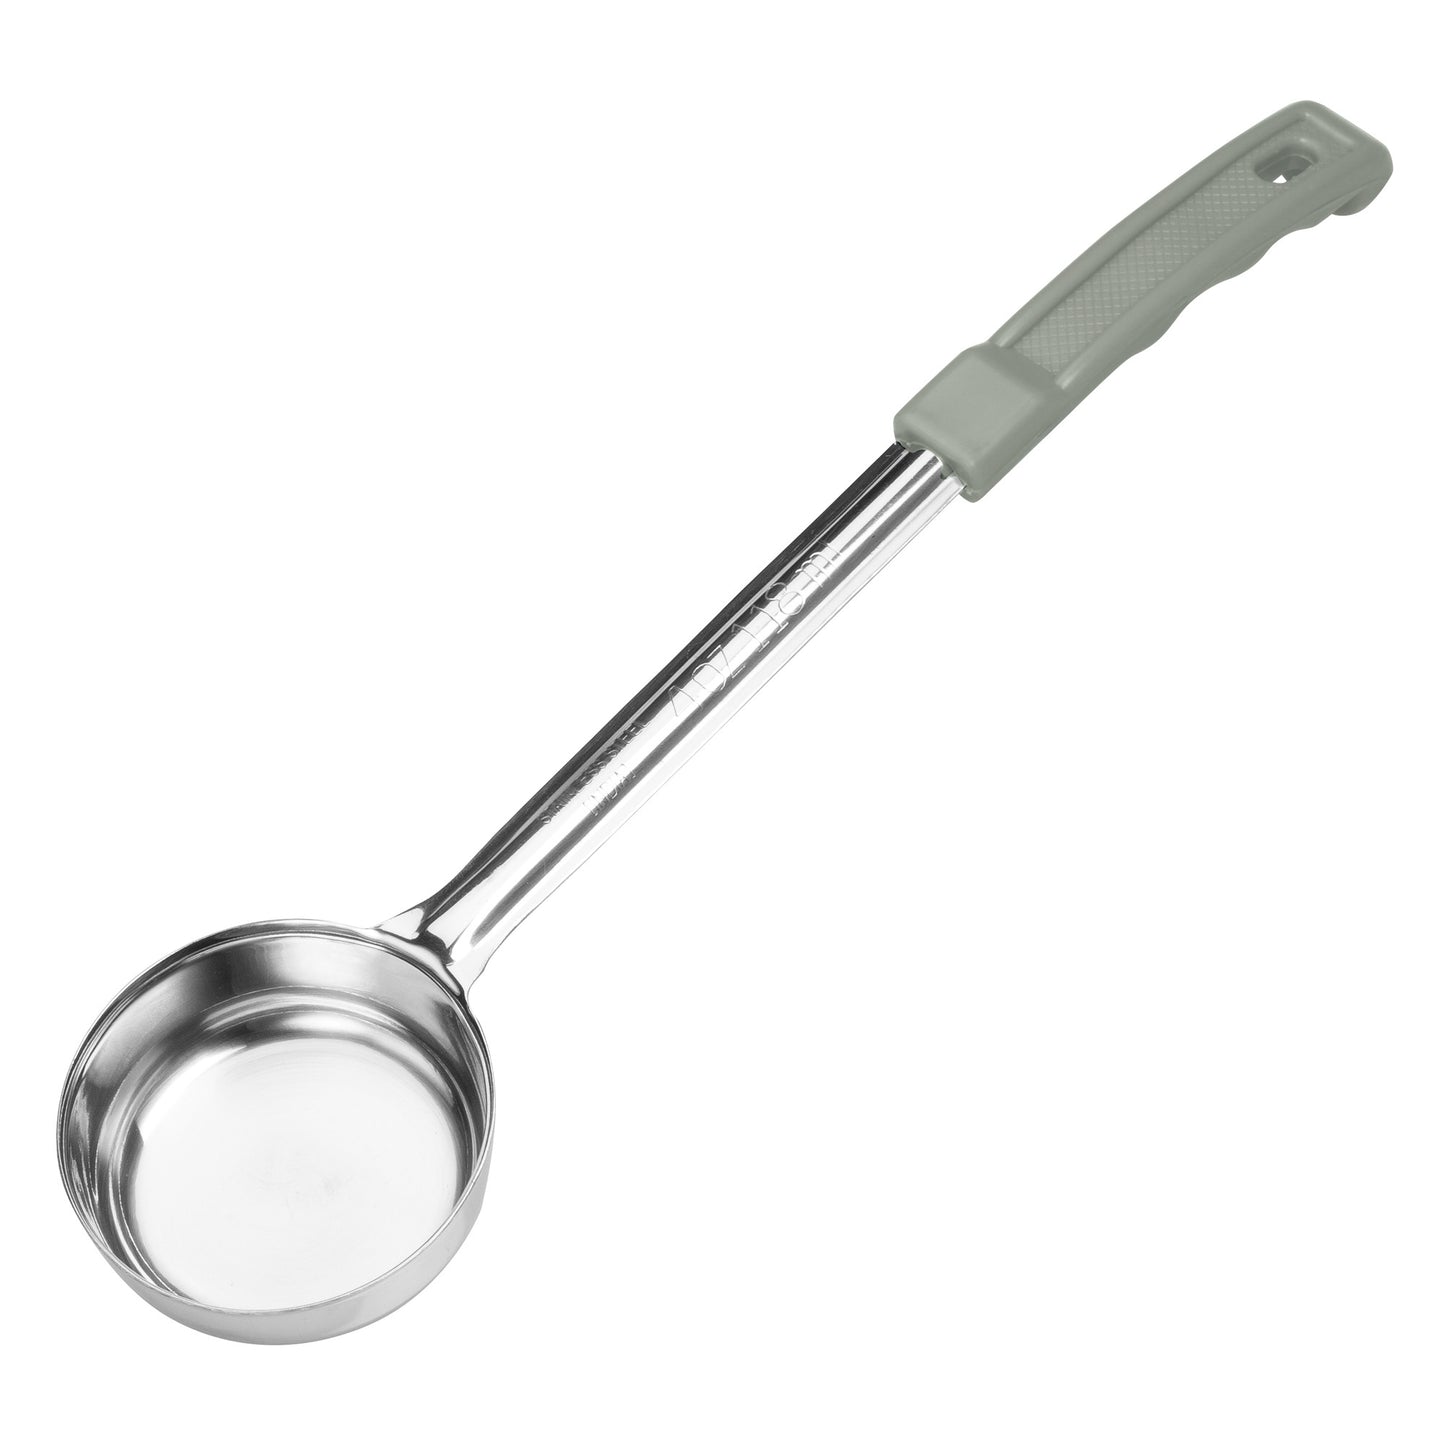 FPSN-4 - Winco Prime One-Piece Stainless Steel Portioners - Solid, 4 oz